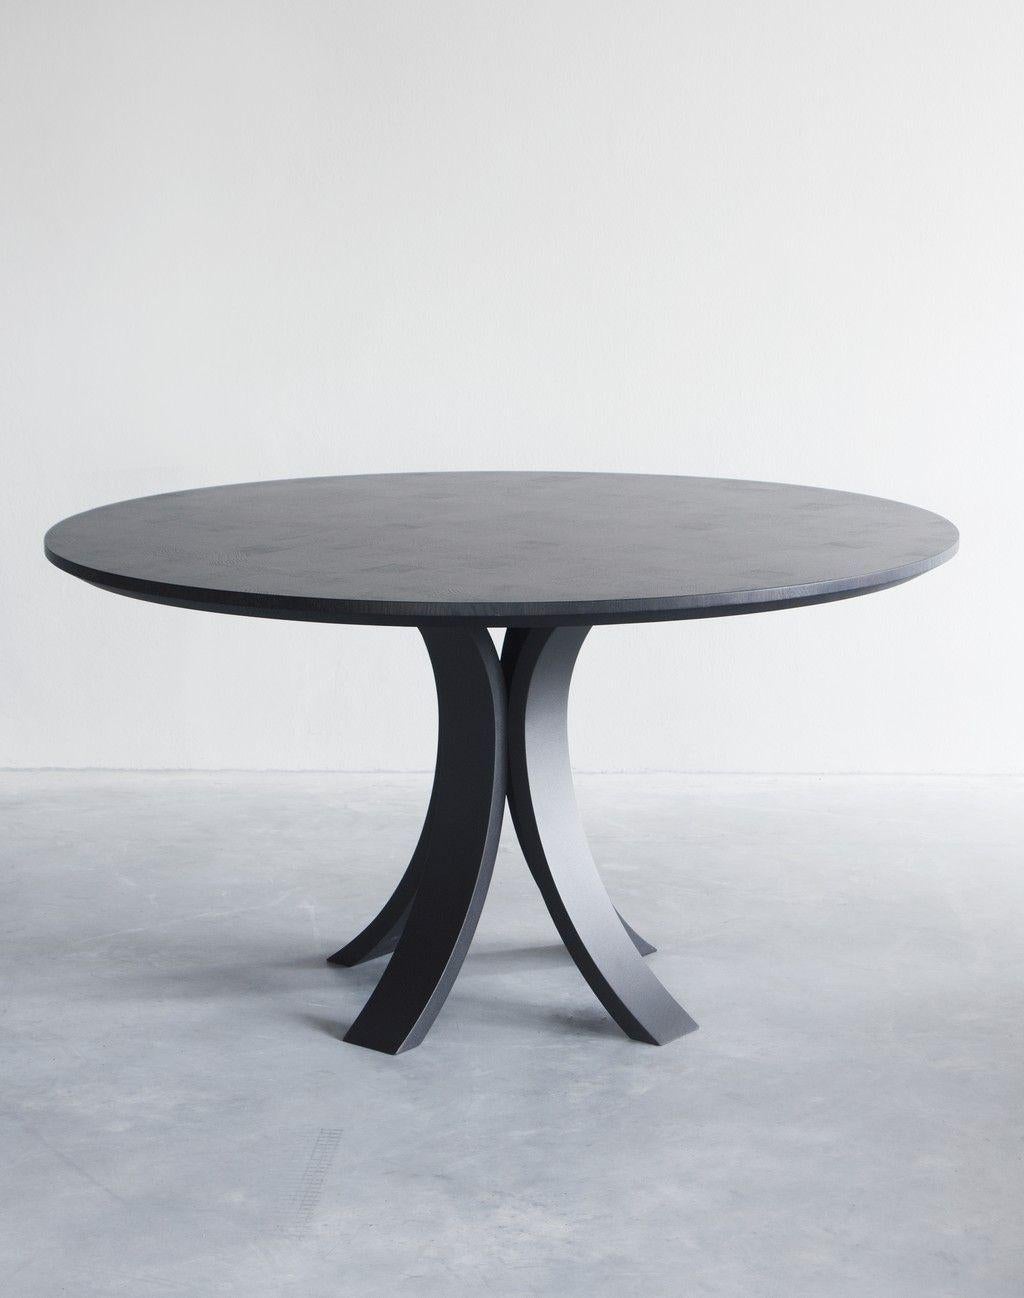 Kops Slim dining table round by Van Rossum.
Dimensions: D140 x W140 x H75 cm
Materials: Oak, Steel.
Also available in walnut. 

The wood is available in all standard Van Rossum colors, or in a matching finish to customer’s own sample.
The